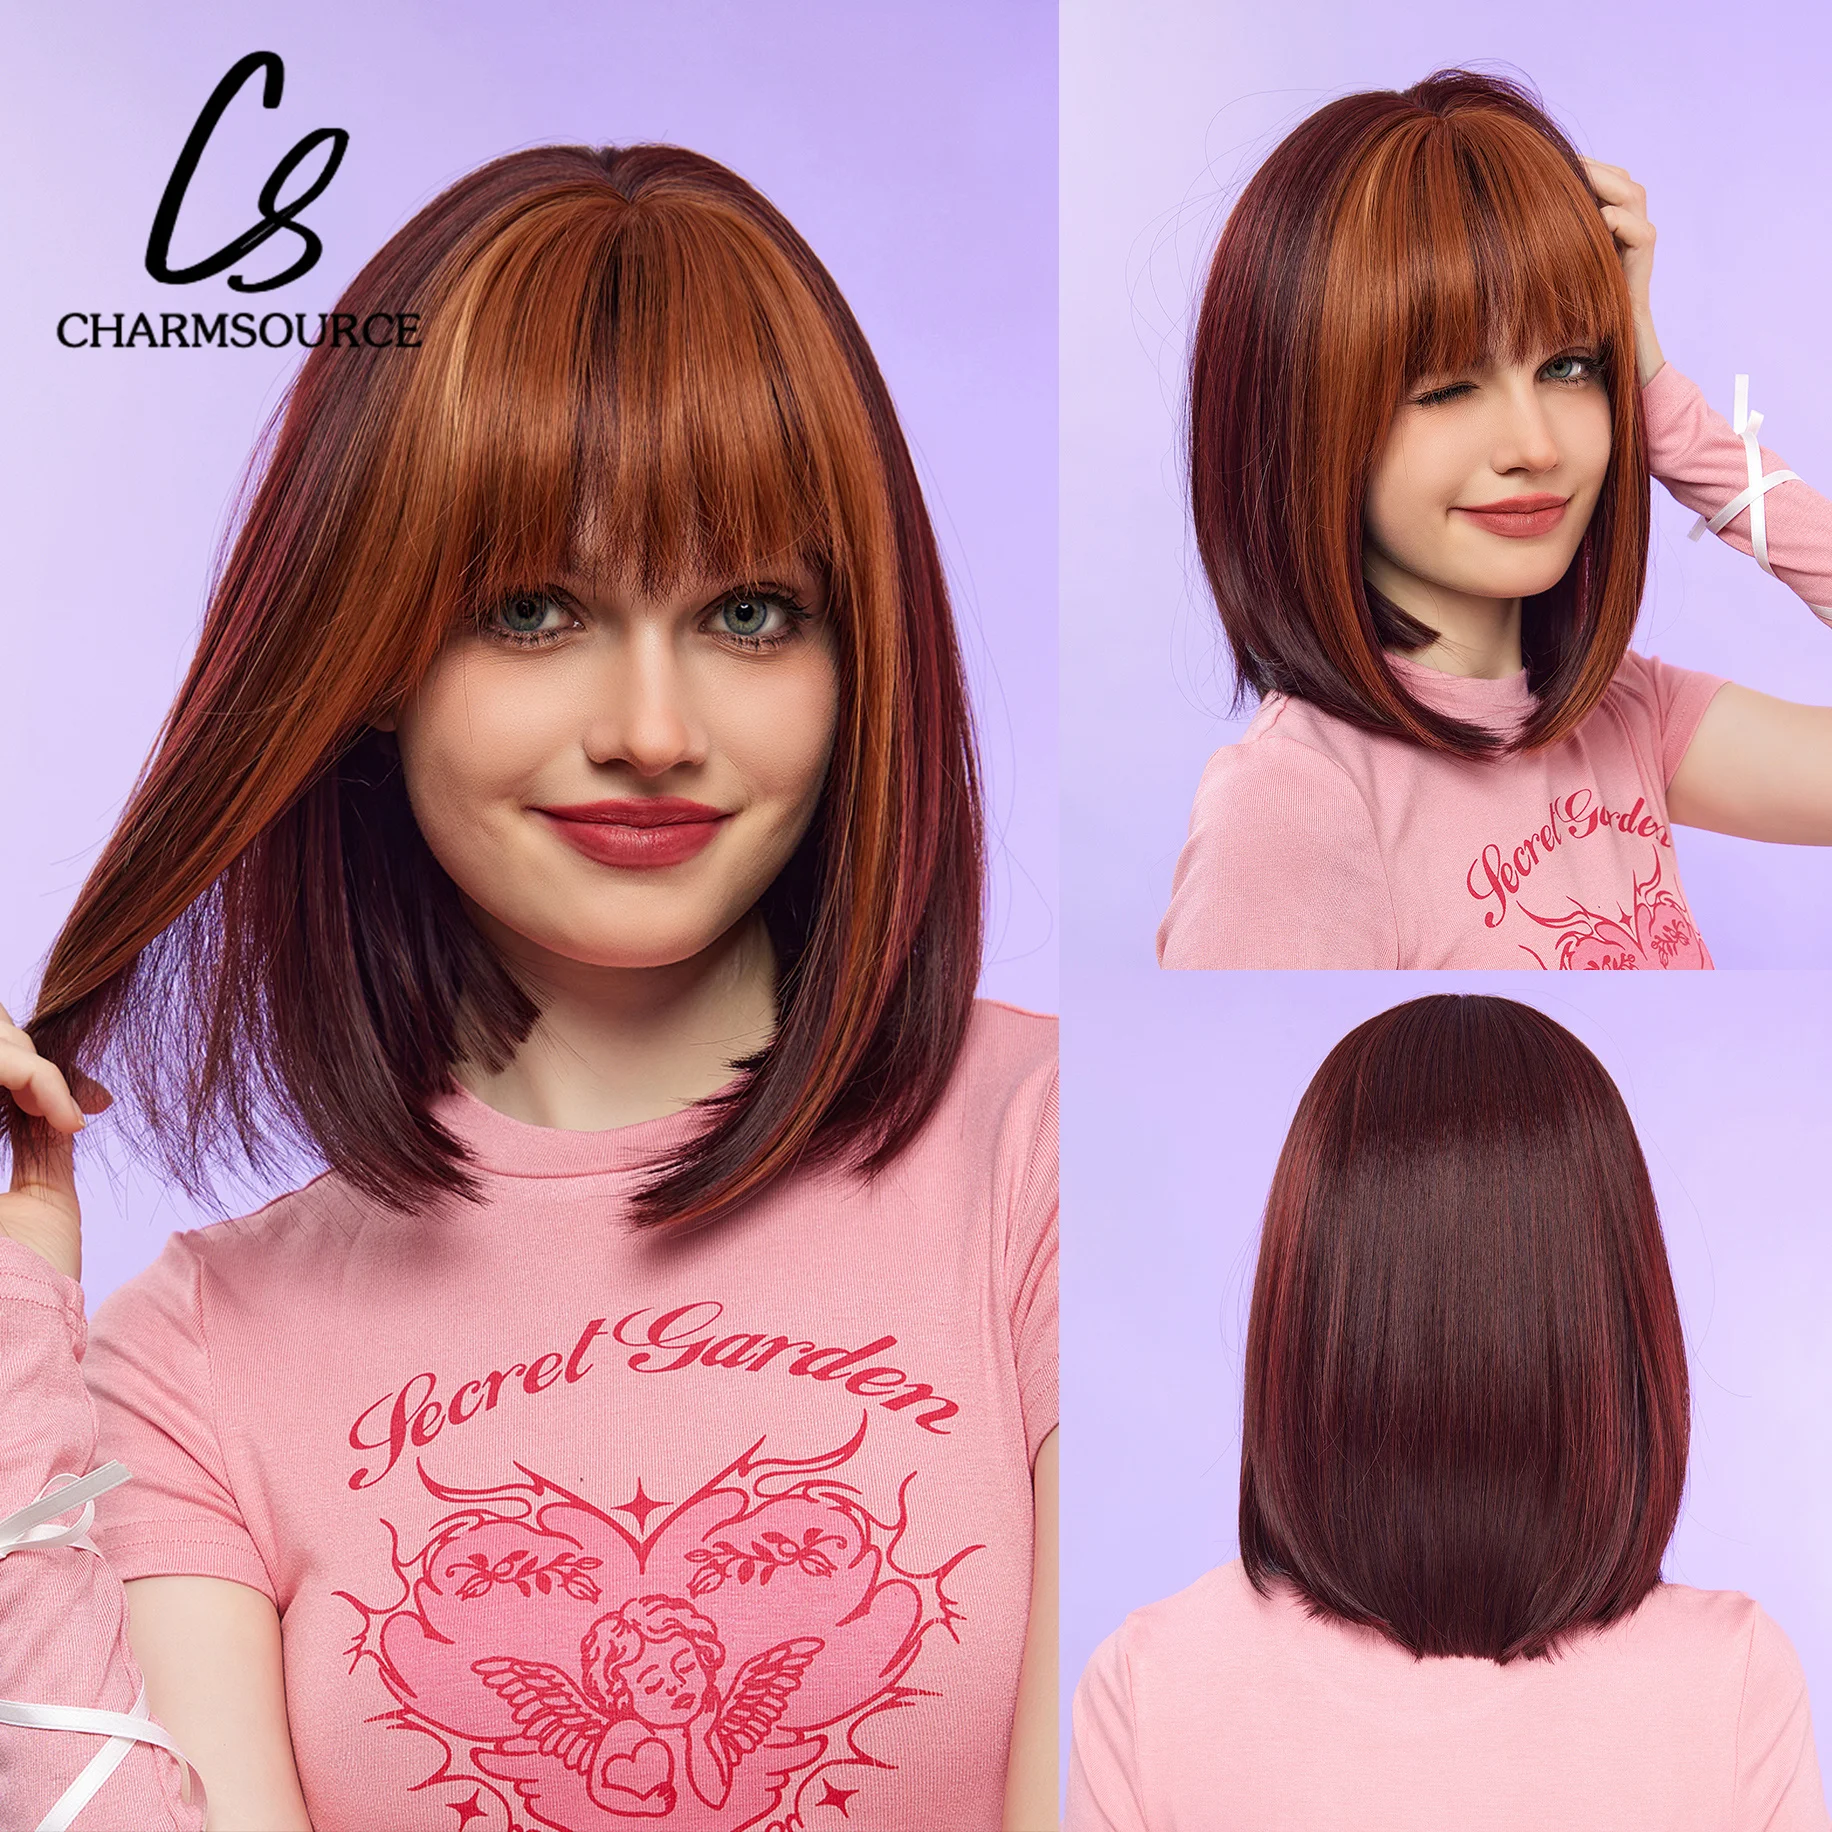 

Red Short Straight Party Synthetic Wigs Ombre Brown Bang Bob Cosplay Lolita Hair Wigs for Women High Temperature Fake Hair